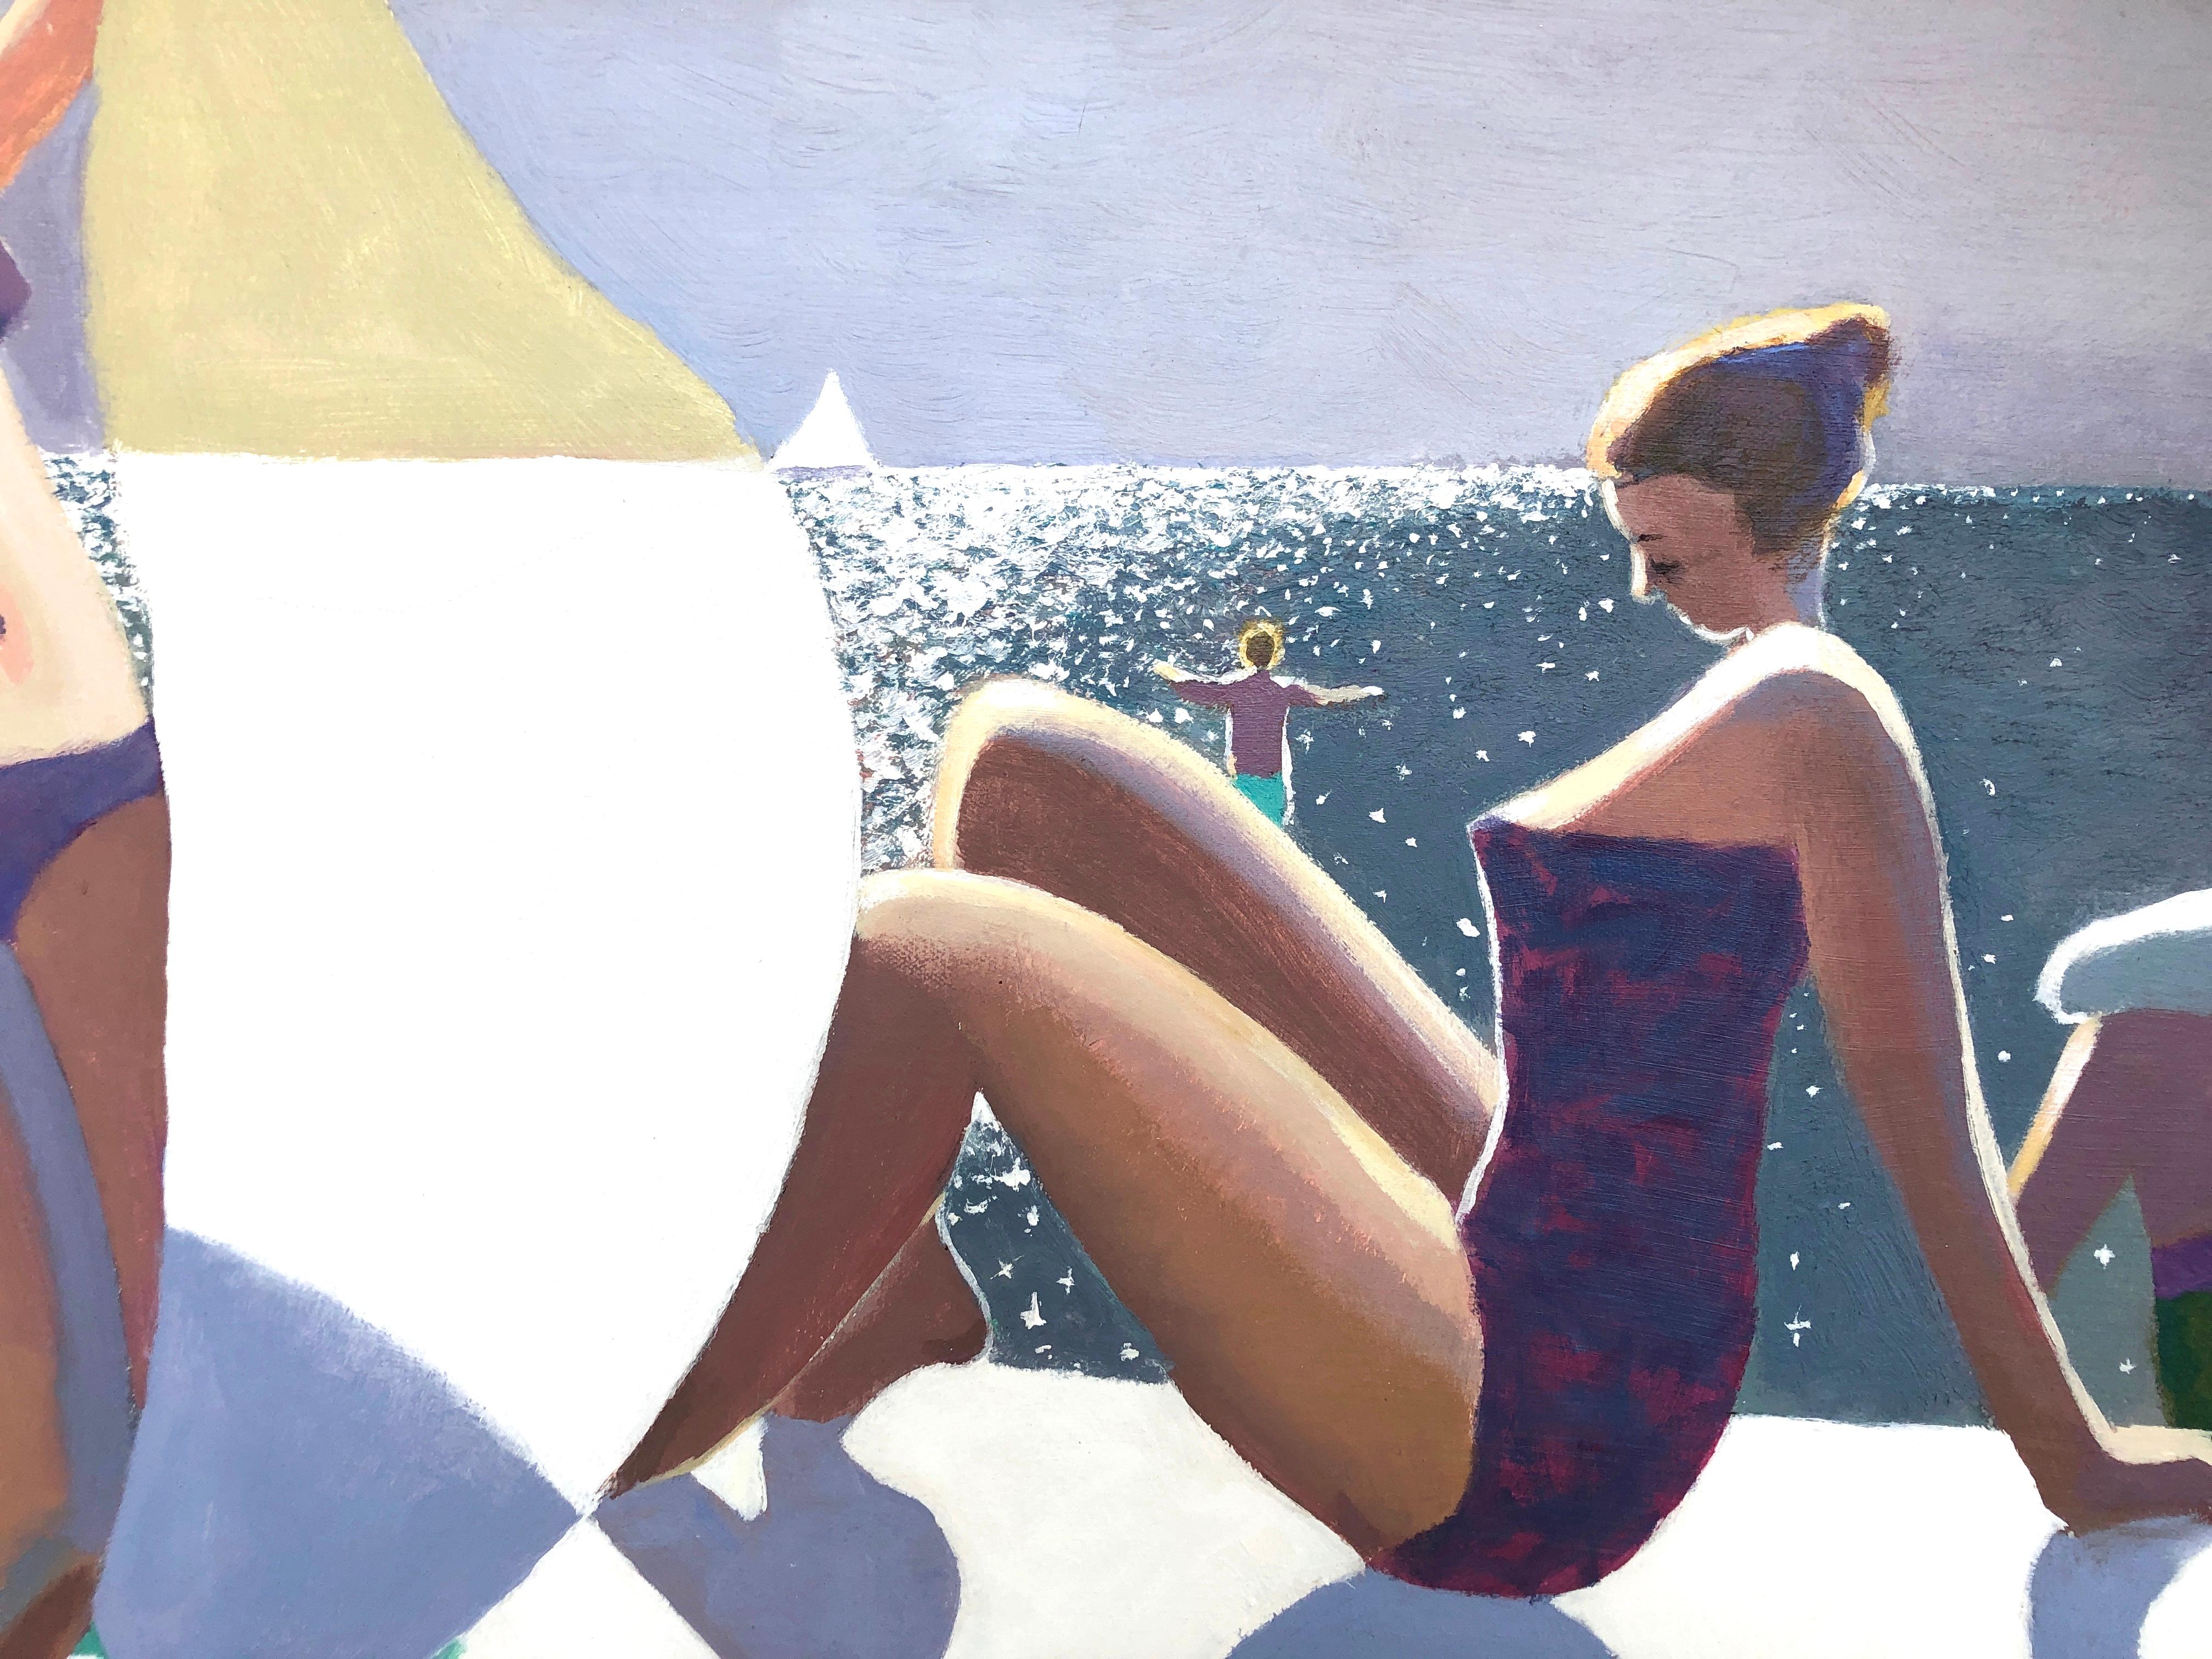 Michael Patterson perfectly captures in this painting the summer day in shapes, forms and reflections.  From the shimmering sea to the figural forms and shadows this painting creates the ideal summer day.  Signed lower right. Condition is excellent.